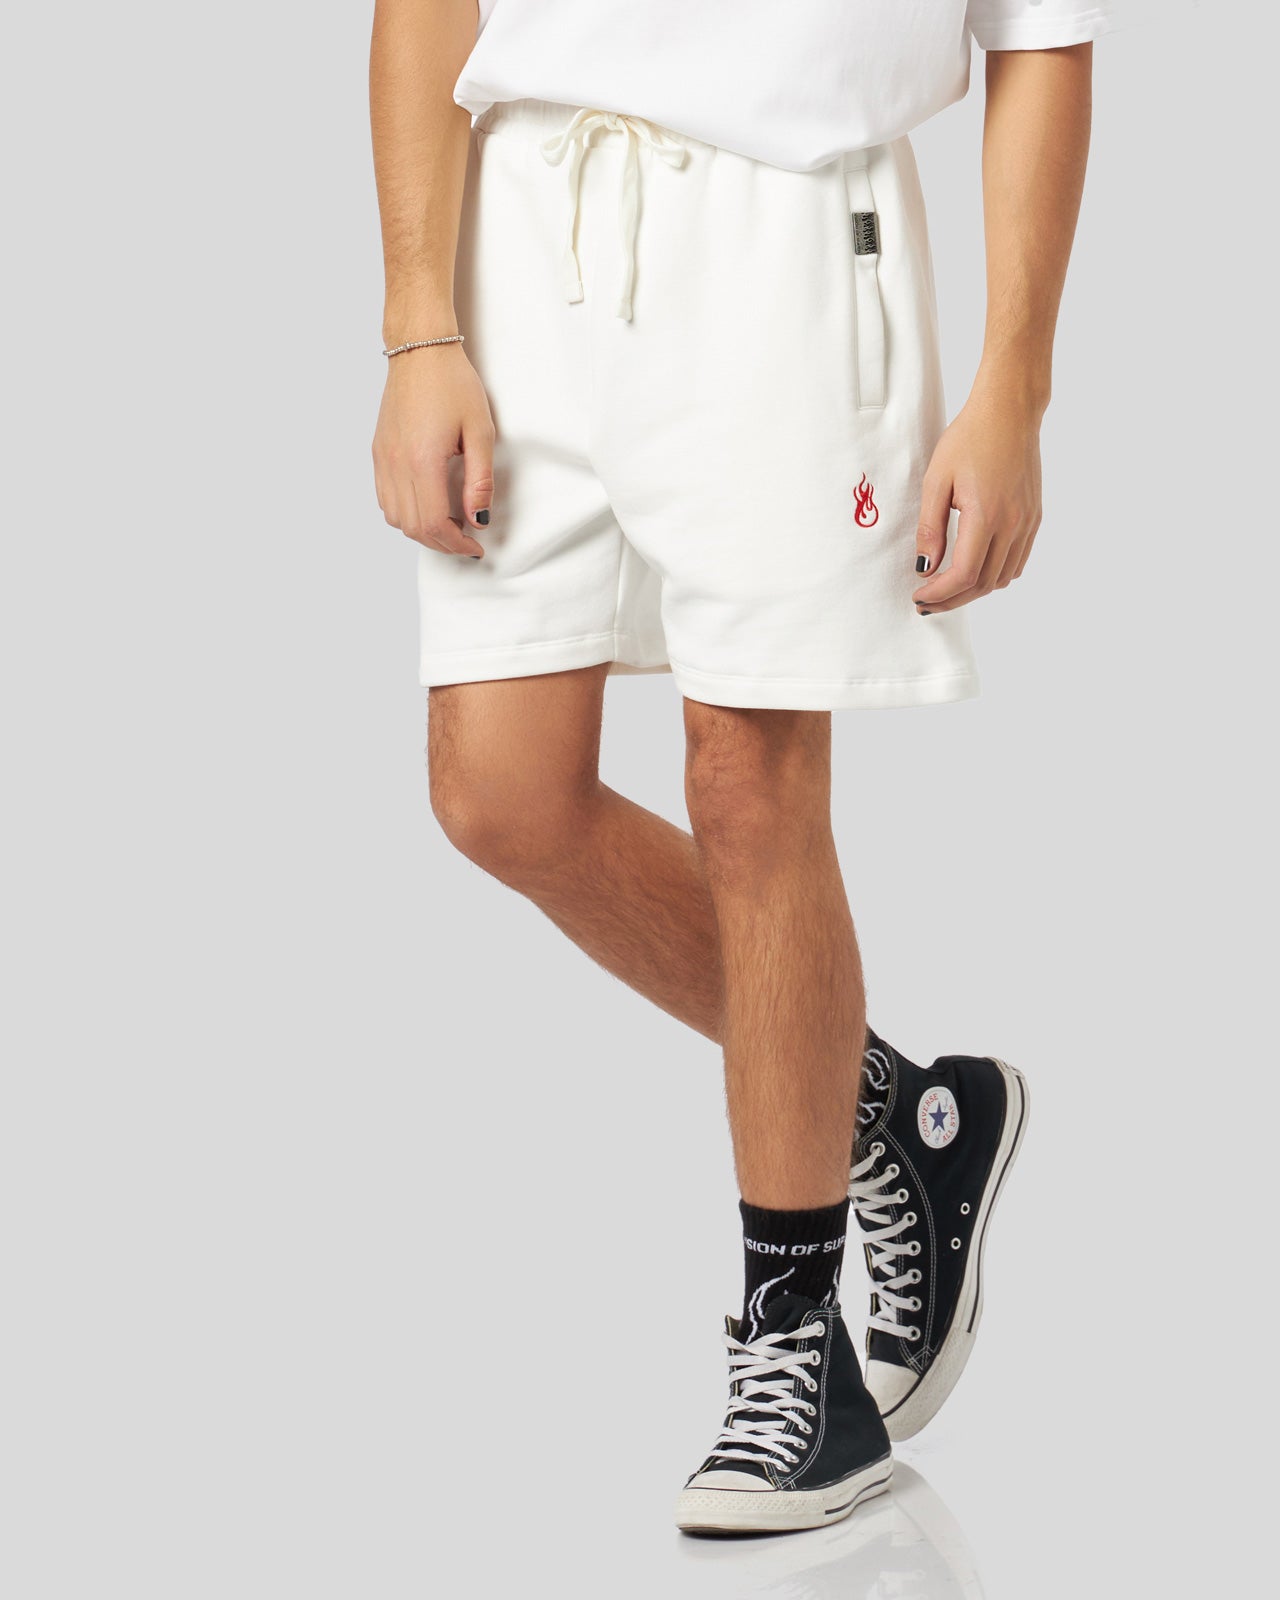 WHITE SHORTS WITH FLAMES LOGO